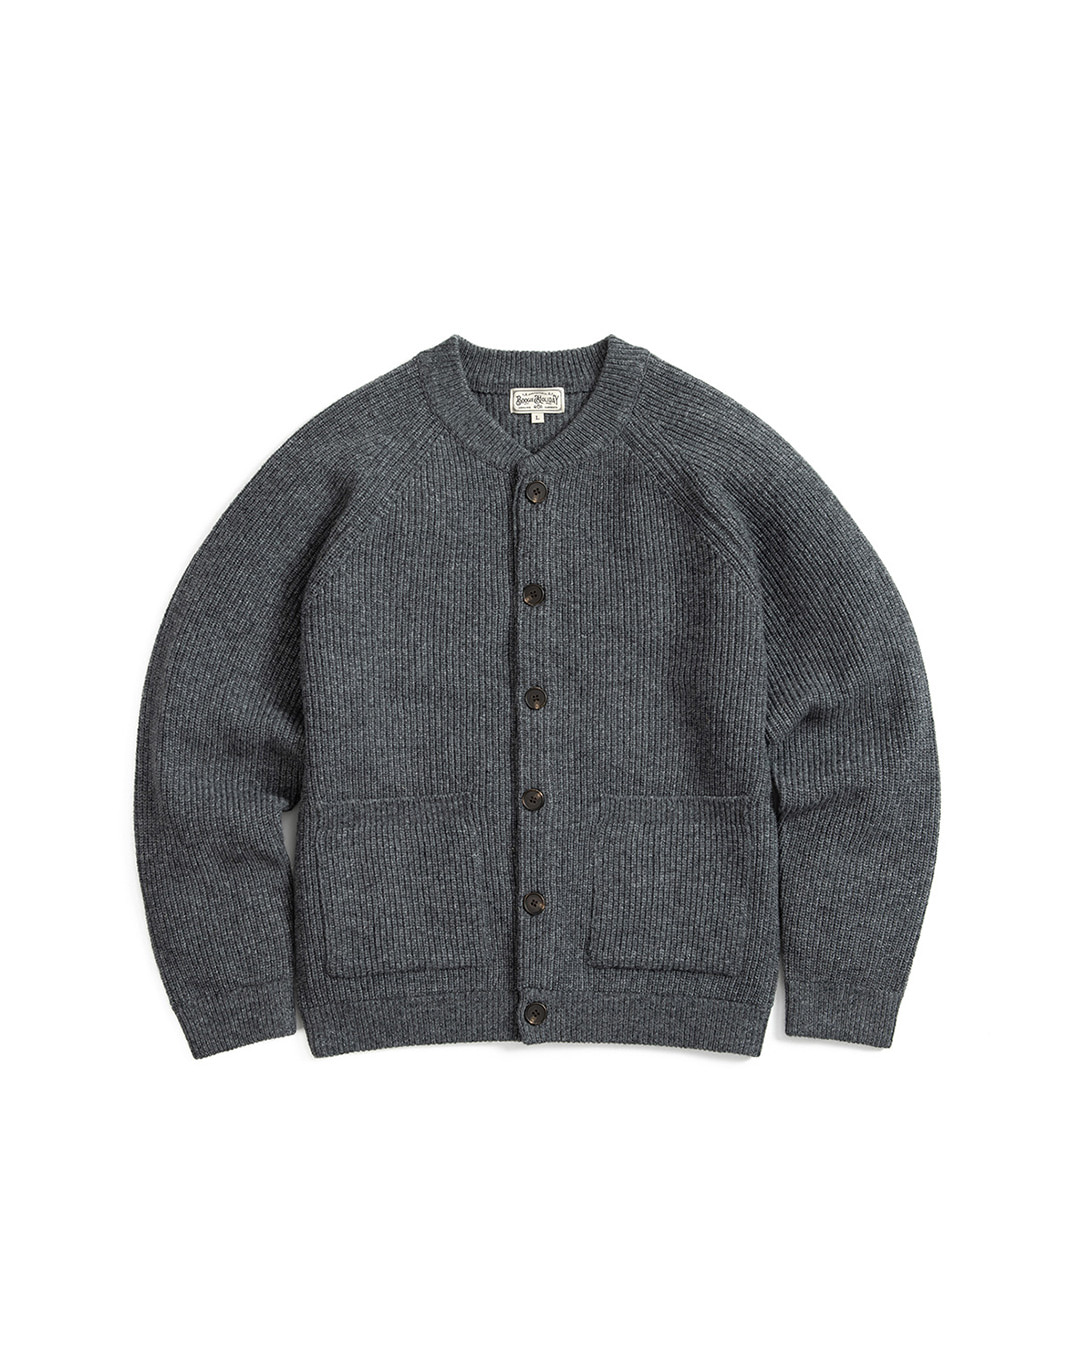 06 LAMBSWOOL ROUND NECK CARDIGAN (charcoal)